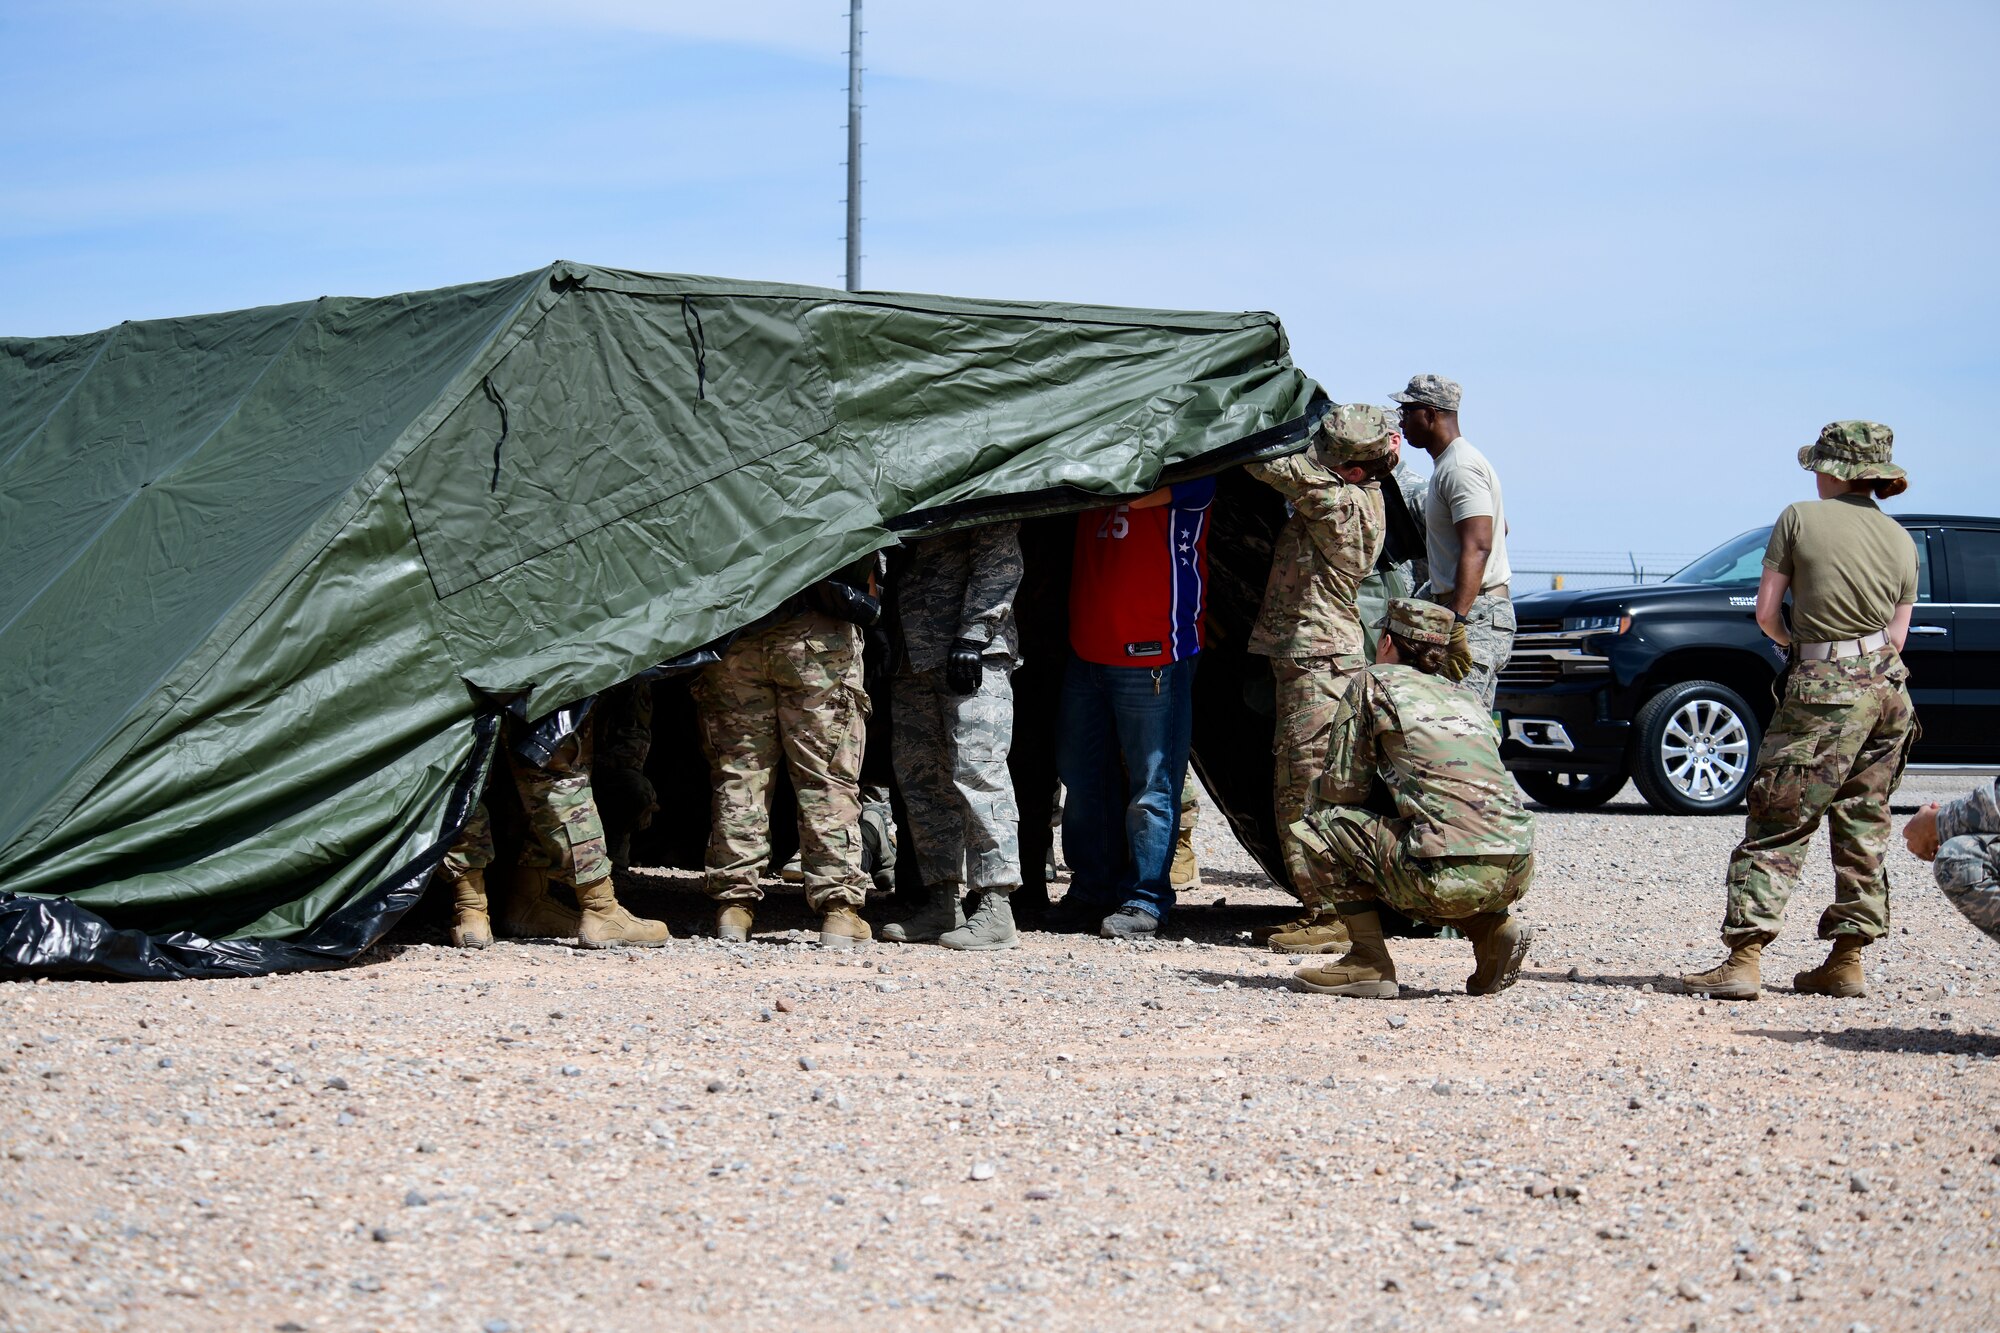 Airmen receive training on how to properly and safely setup a tent during the Combat Support Wing exercise, April 29, 2019, at Fort Bliss, Texas. The CSW concept provides Airmen with the training and ability to deliver dominant airpower more effectively and efficiently anywhere in the world. (U.S. Air Force photo by Senior Airman Kenneth Boyton)